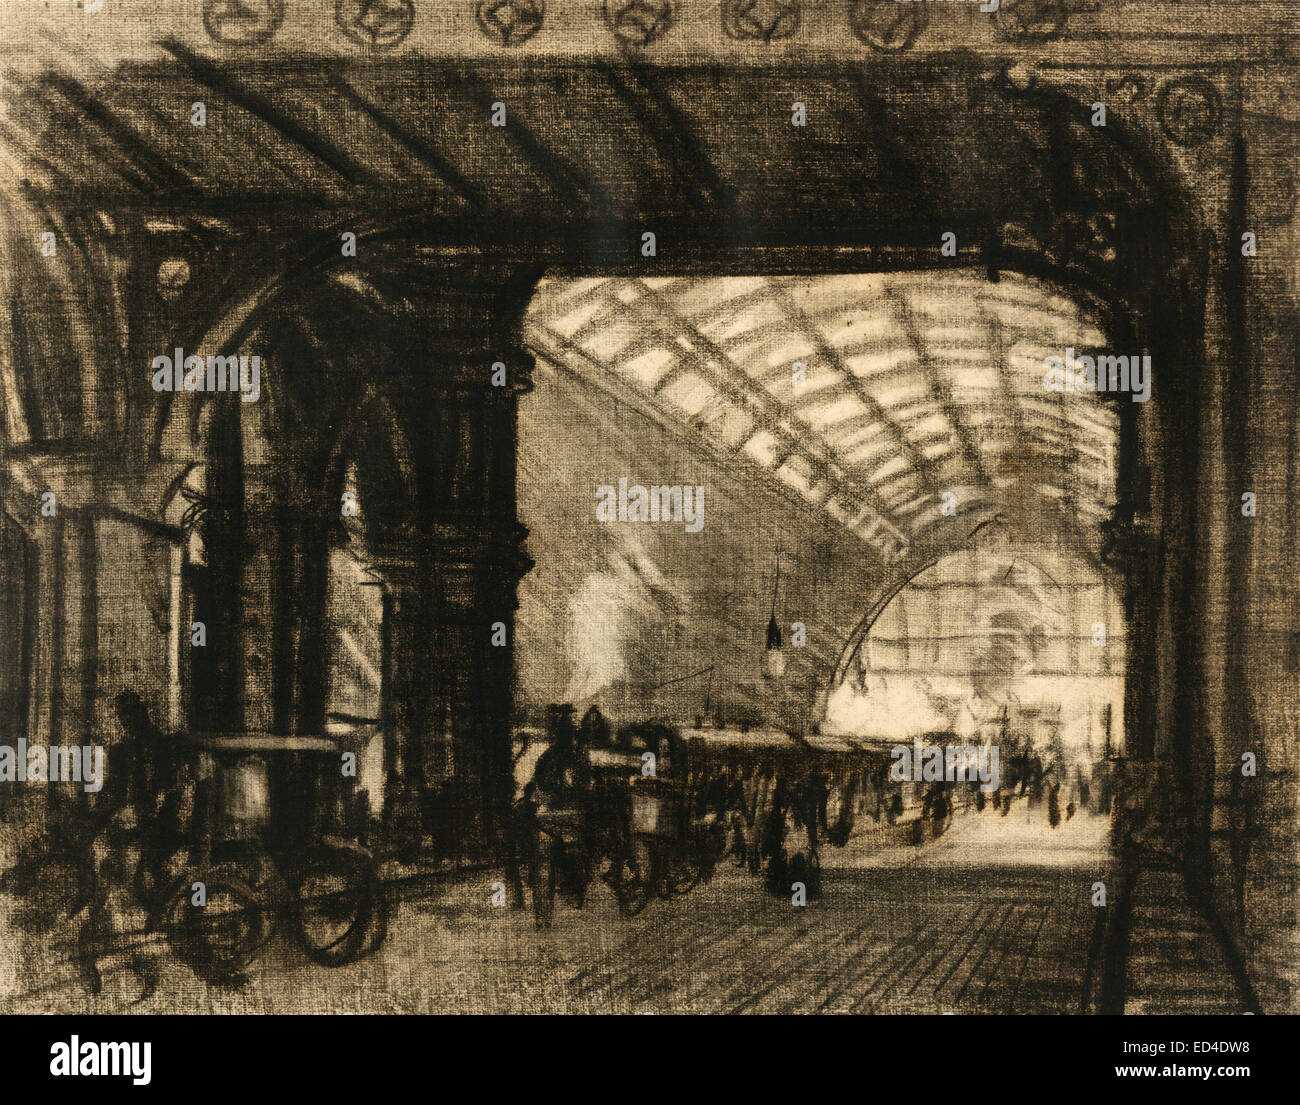 St. Pancras Station - London, England.  View past carriage in left foreground under bridge to long skylit arched station crowded with figures and carriages beyond, circa 1908 Stock Photo